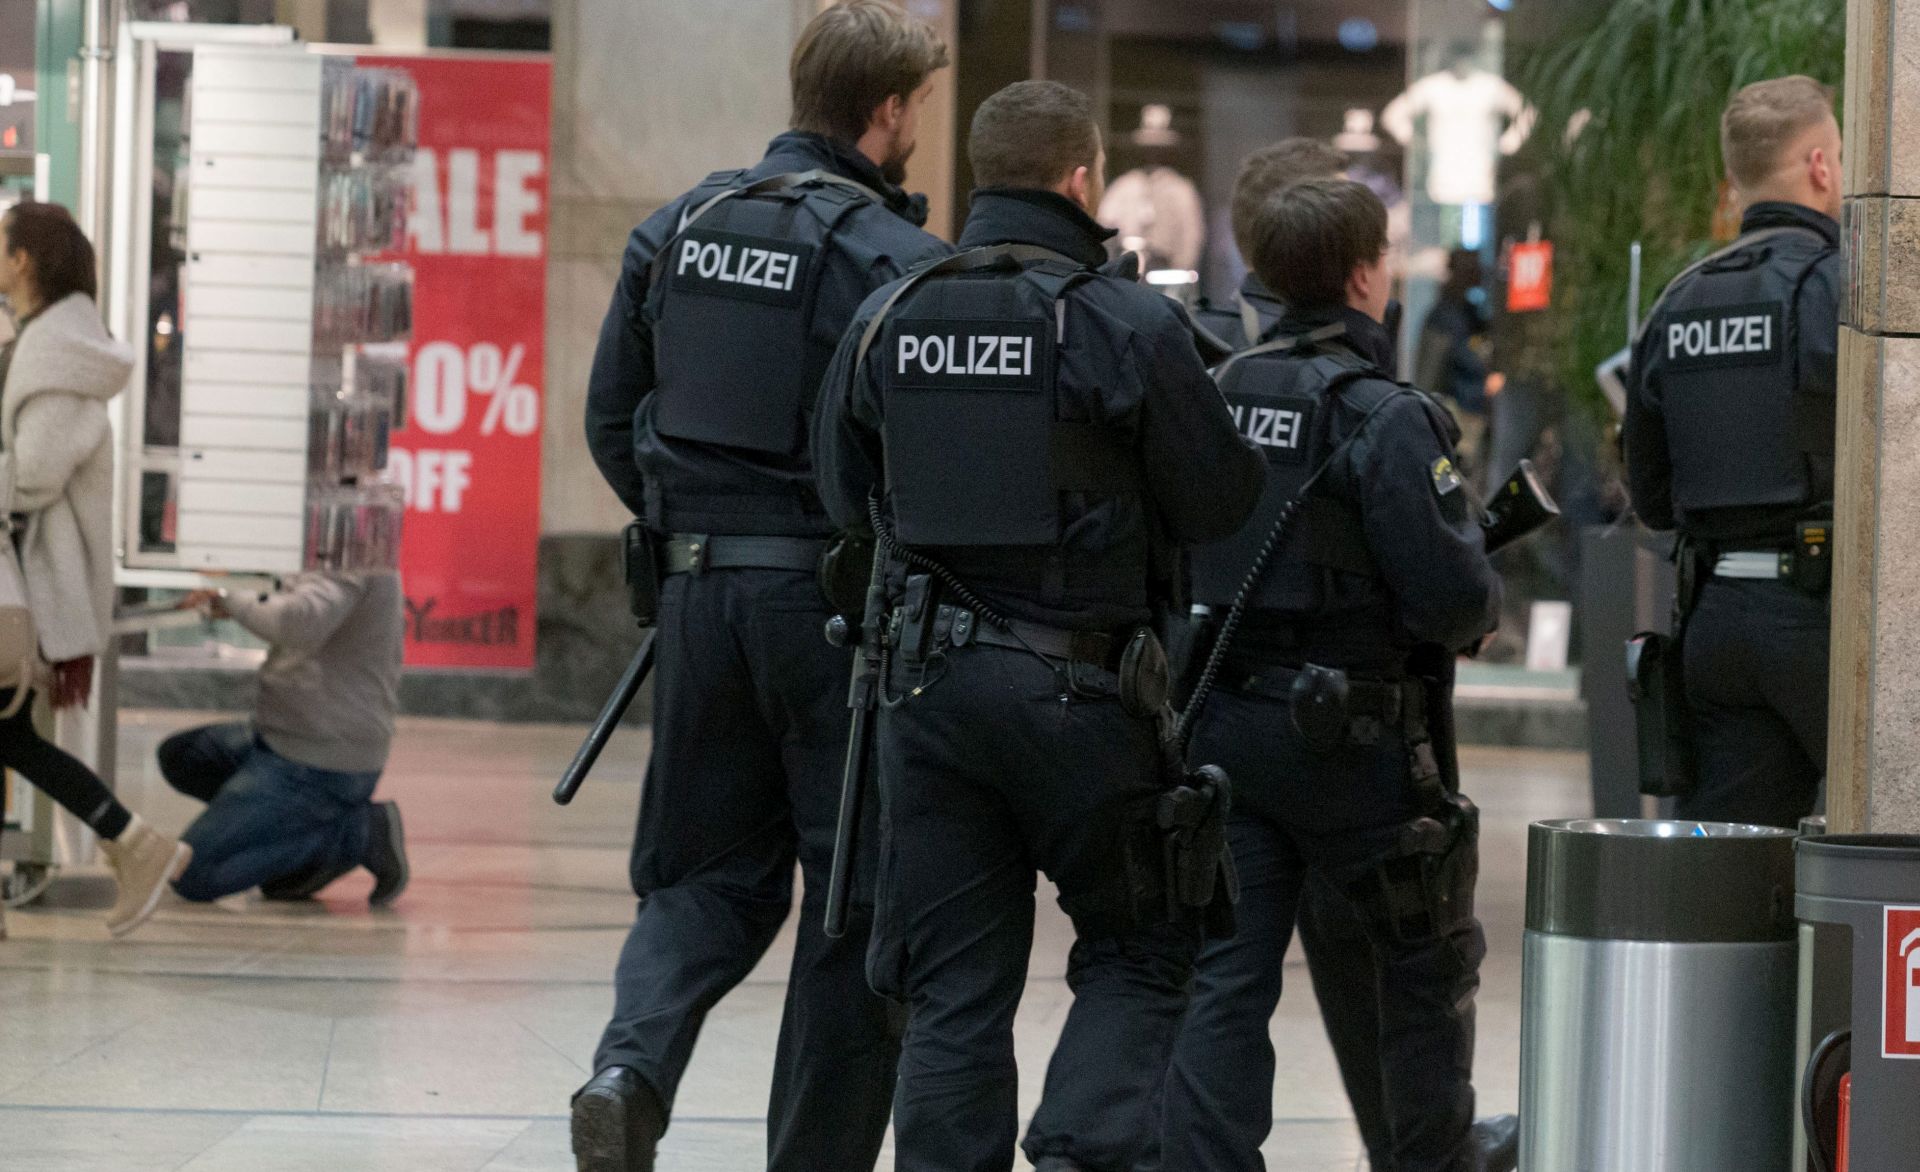 epa05686224 A unit of police officers is seen during a security operation in the shopping center Centro in Oberhausen, Germany, 22 December 2016. German police arrested two men in Duisburg on suspicion of a possible attack preparation at a shopping center. The two brothers, 28 and 31, originally from Kosovo, were suspected of planning an attack on the Centro shopping center in Oberhausen, near the Dutch border, media reported.  c